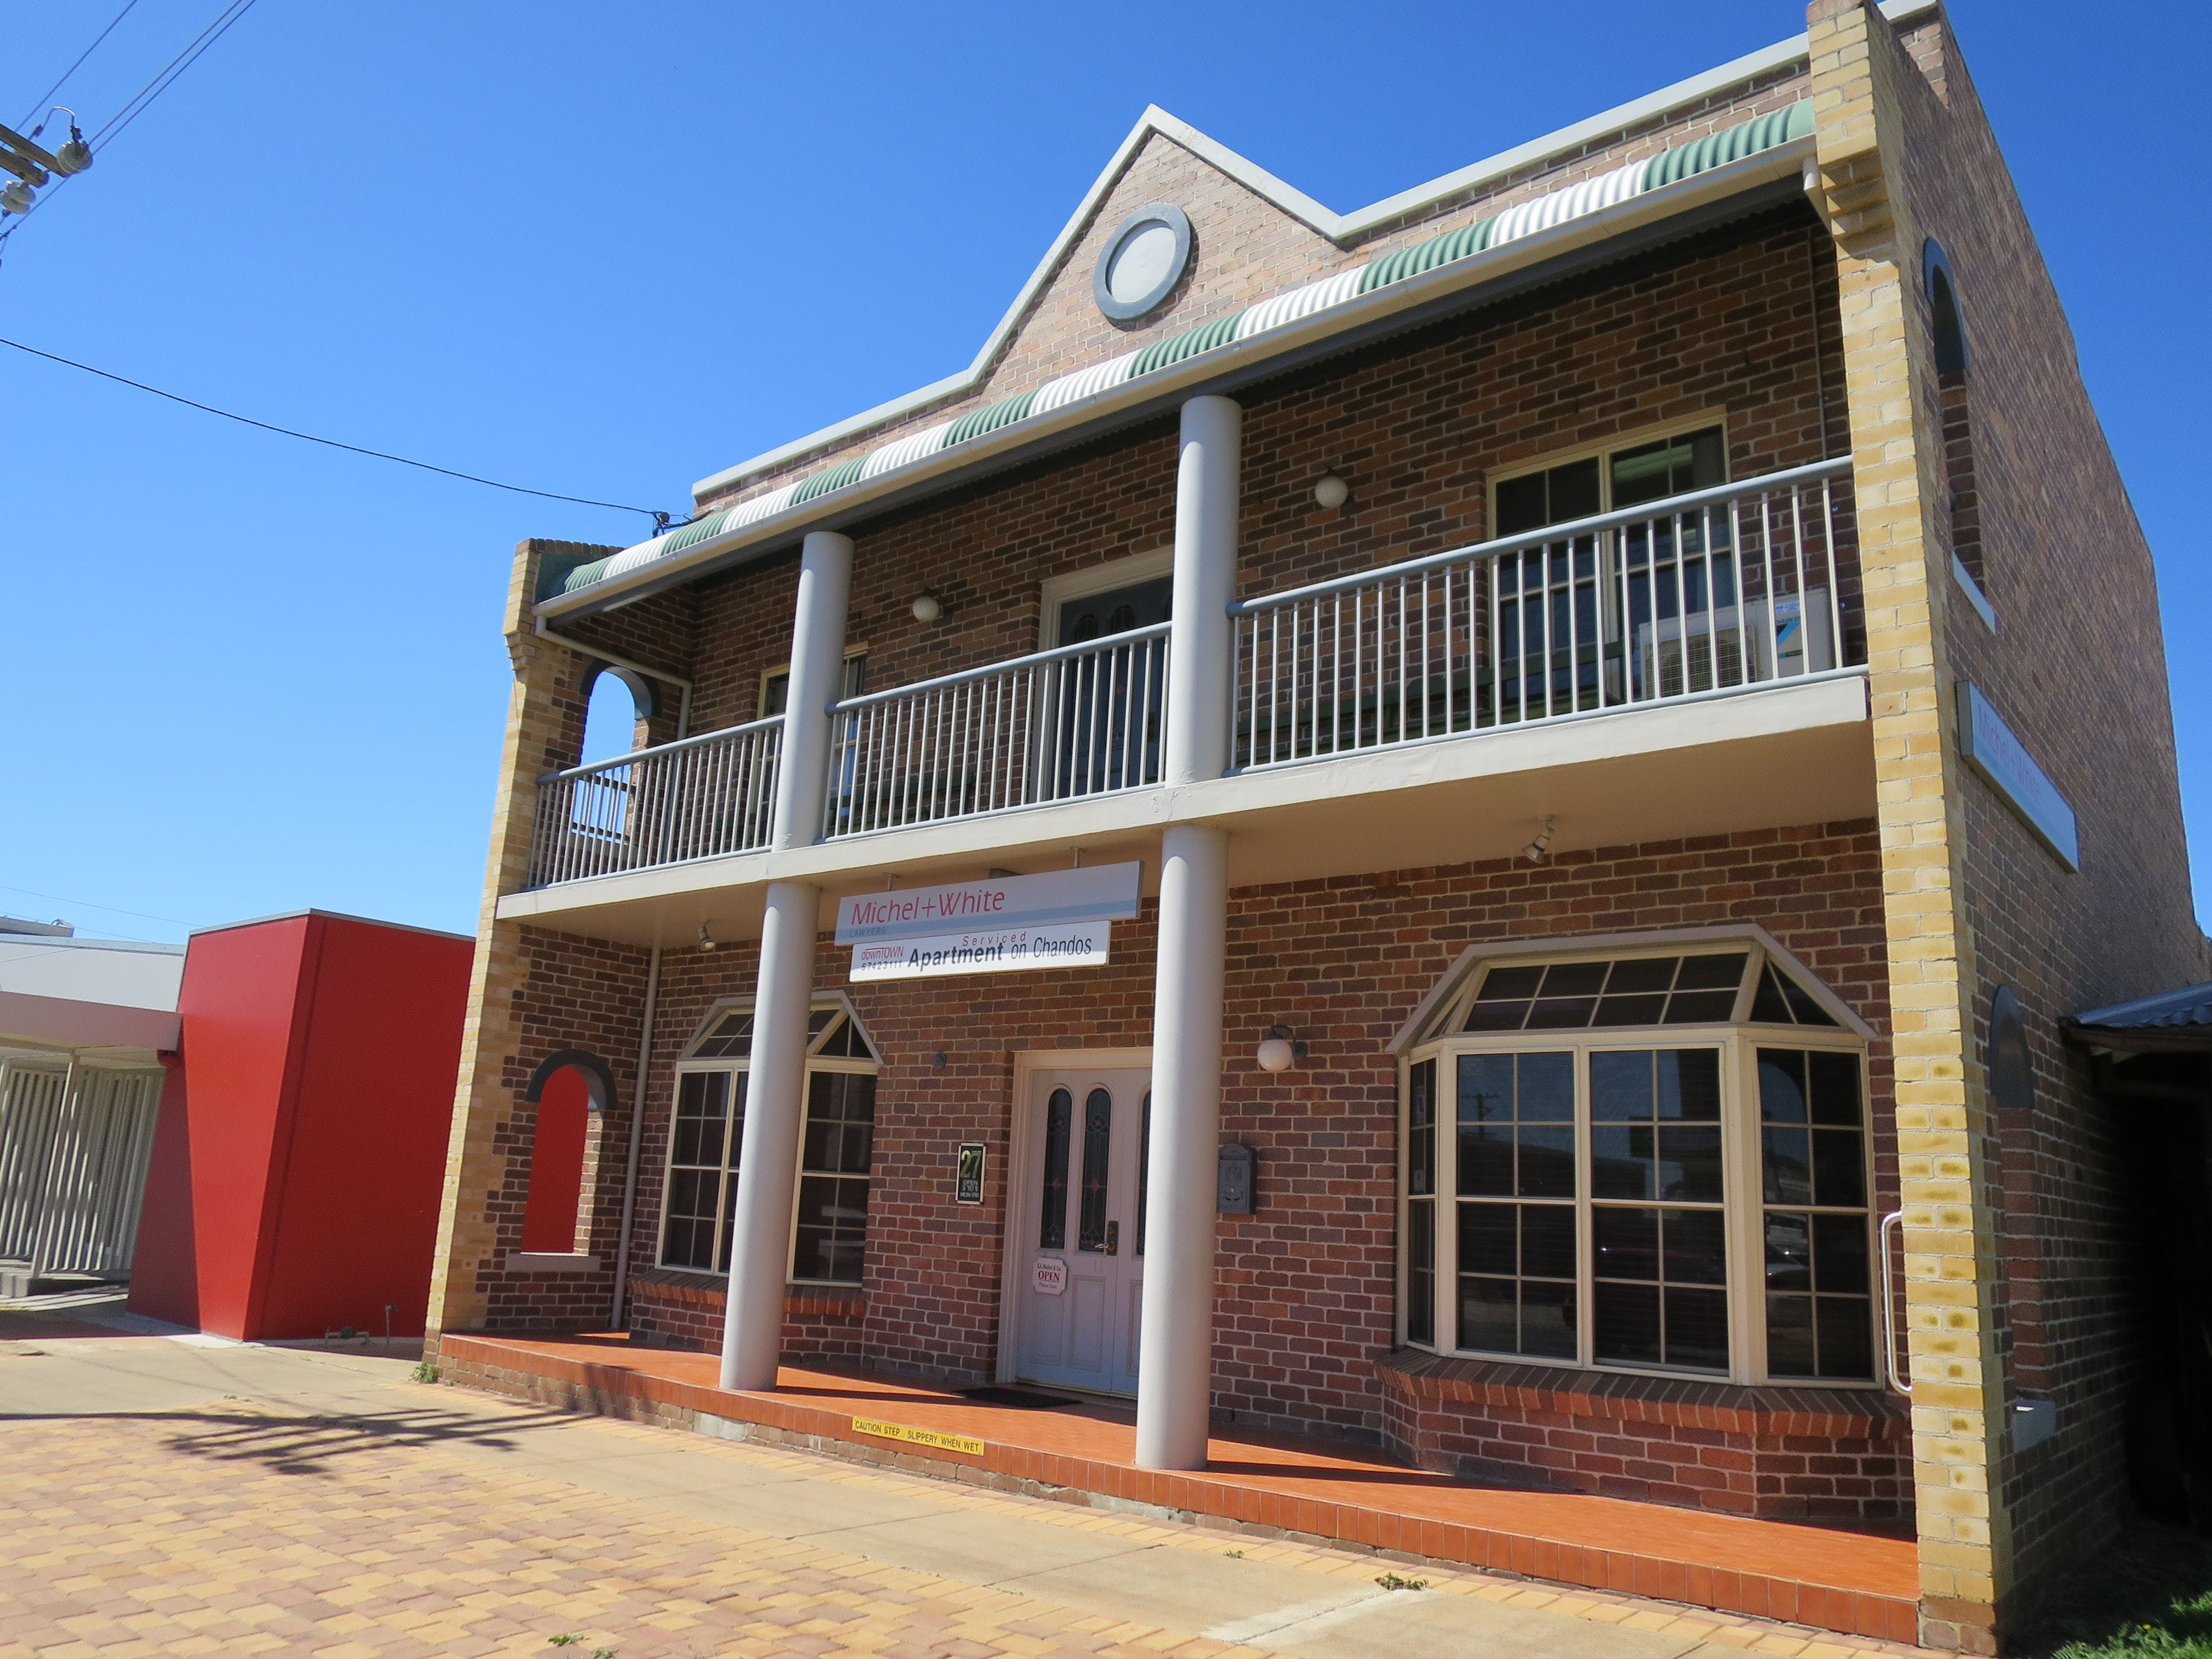 Downtown Apartment on Chandos - Accommodation Port Macquarie